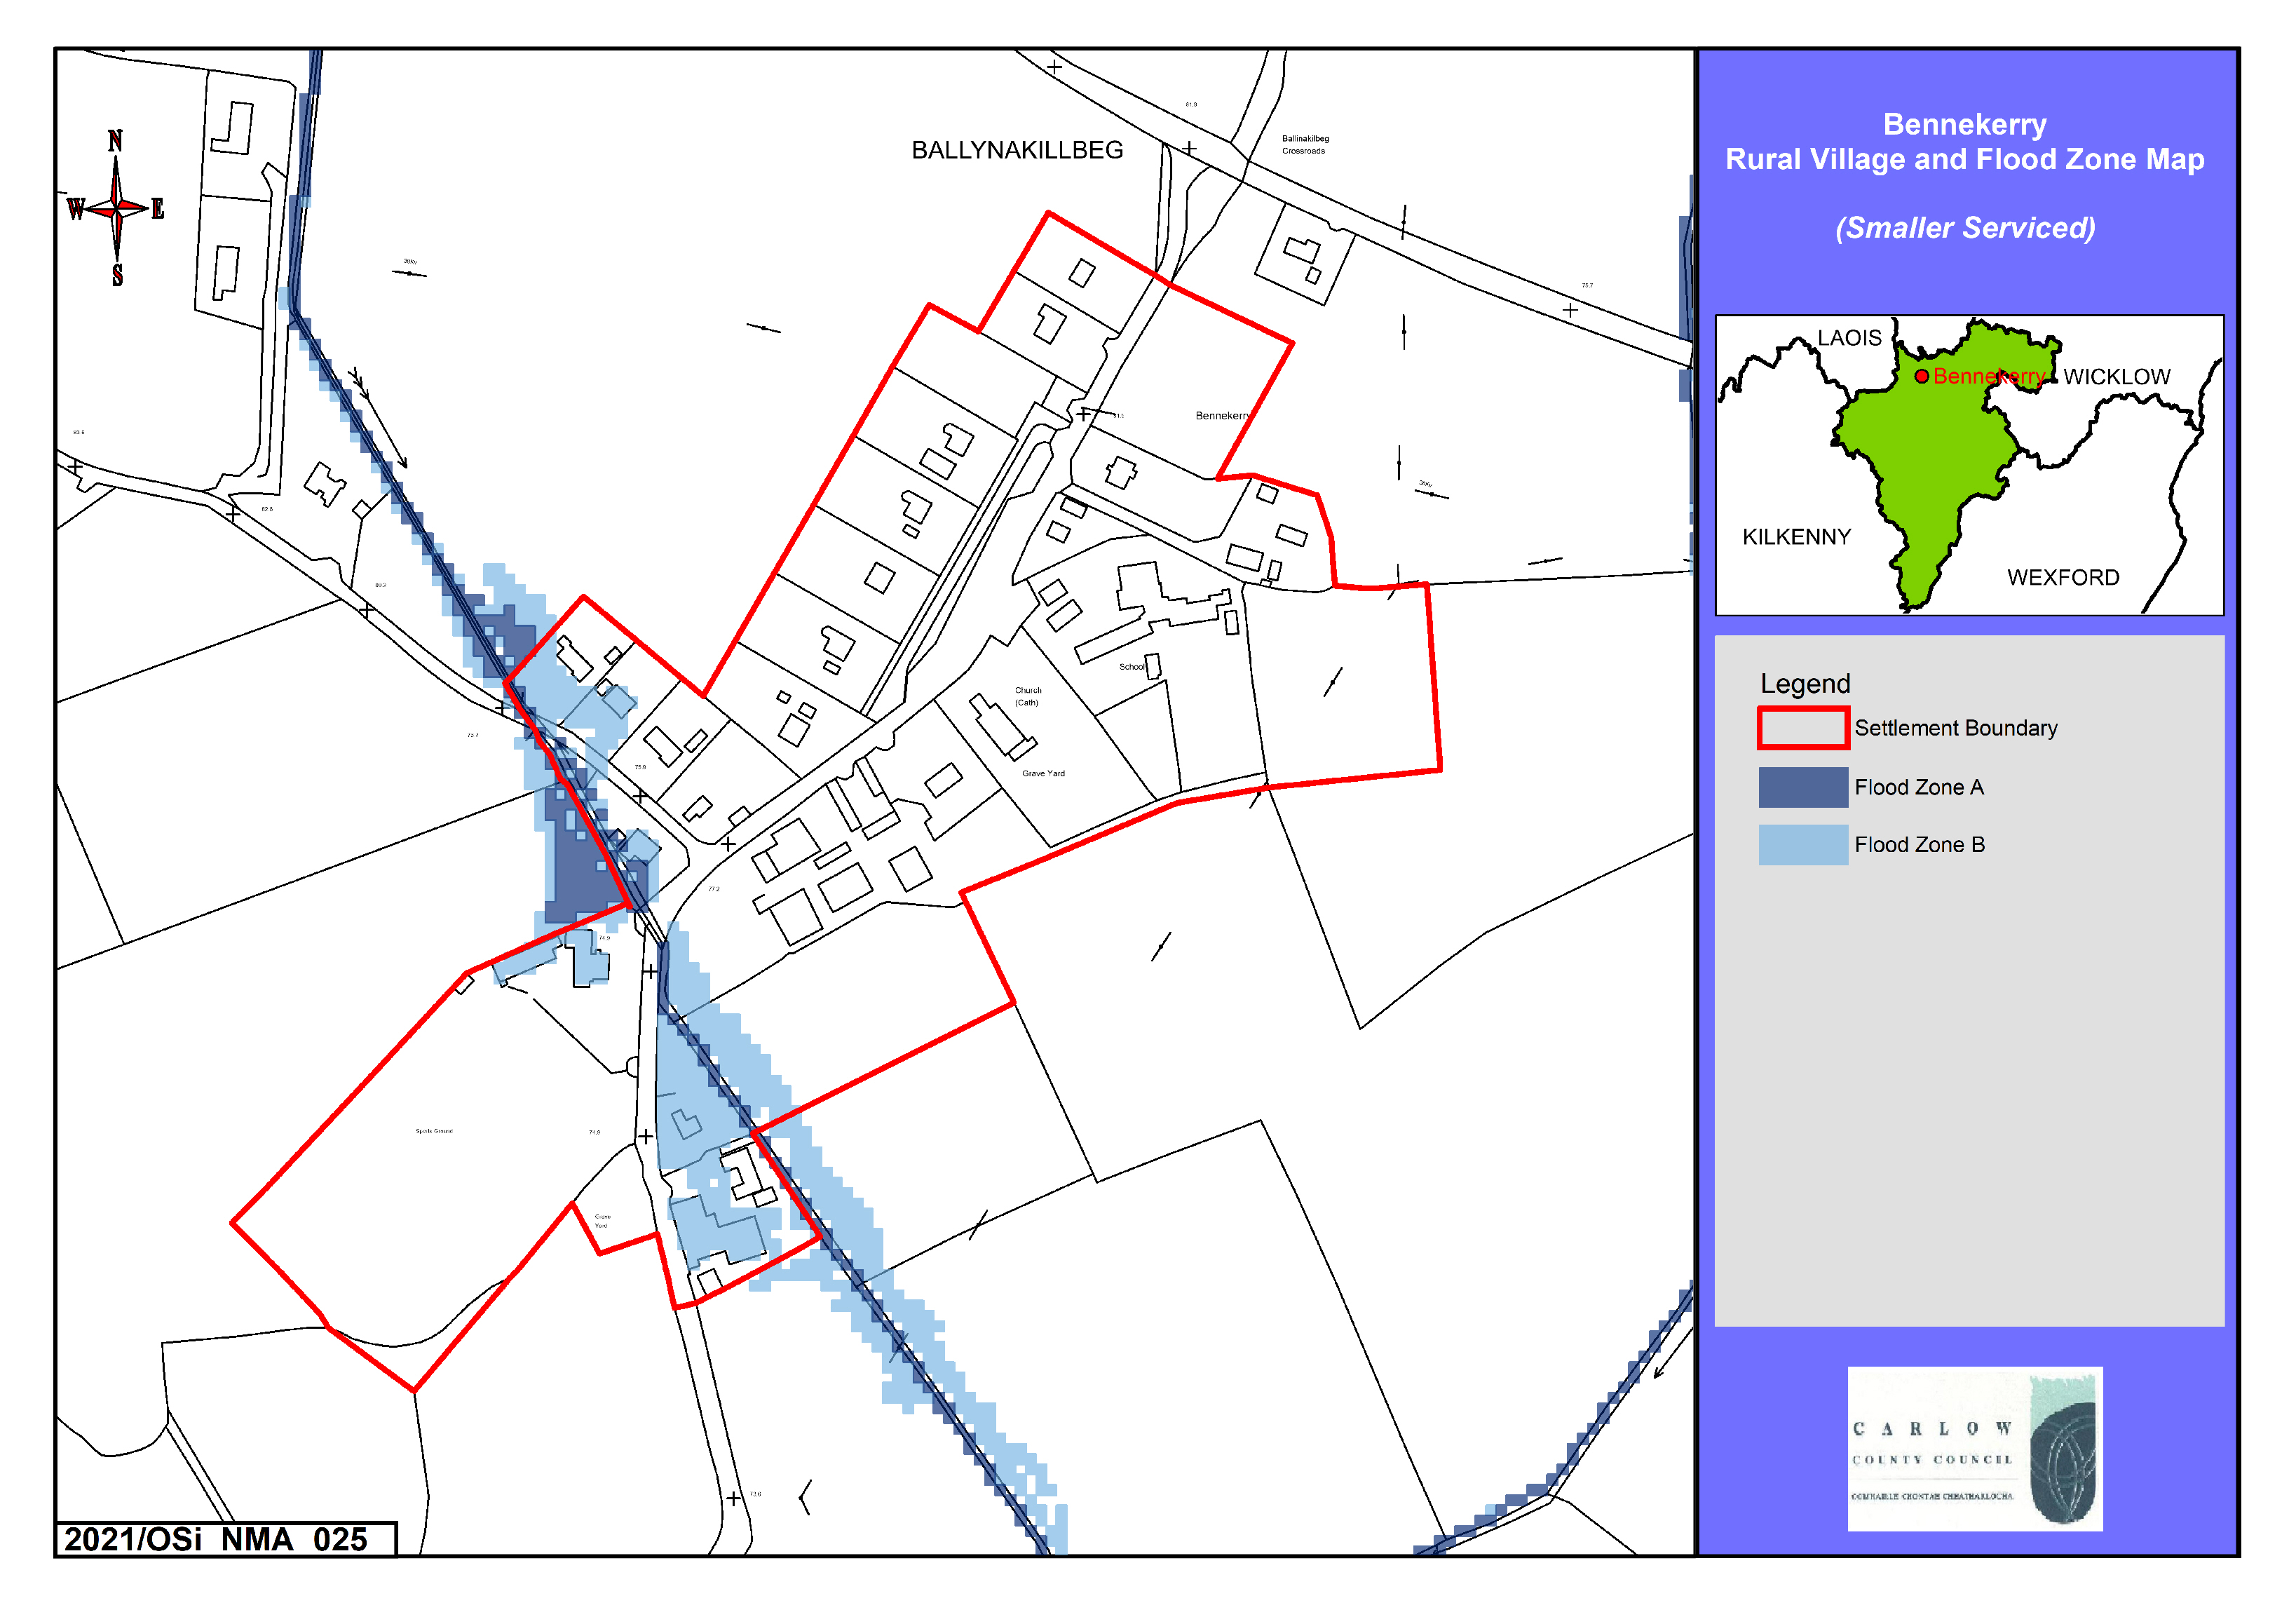 Bennekerry Rural Village and Flood Zone Map